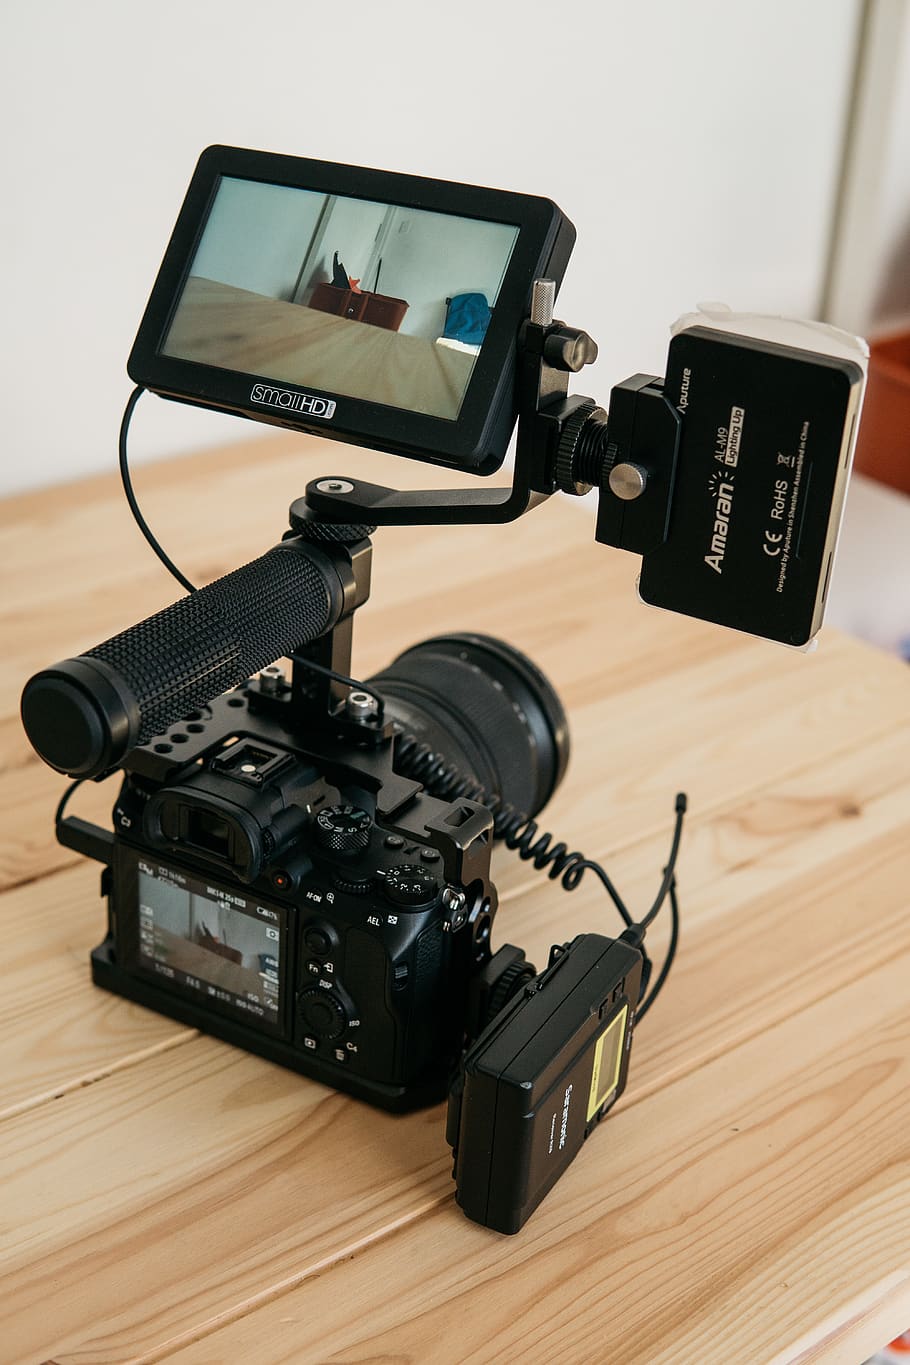 turned-on DSLR camera and displaying table top, electronics, video camera